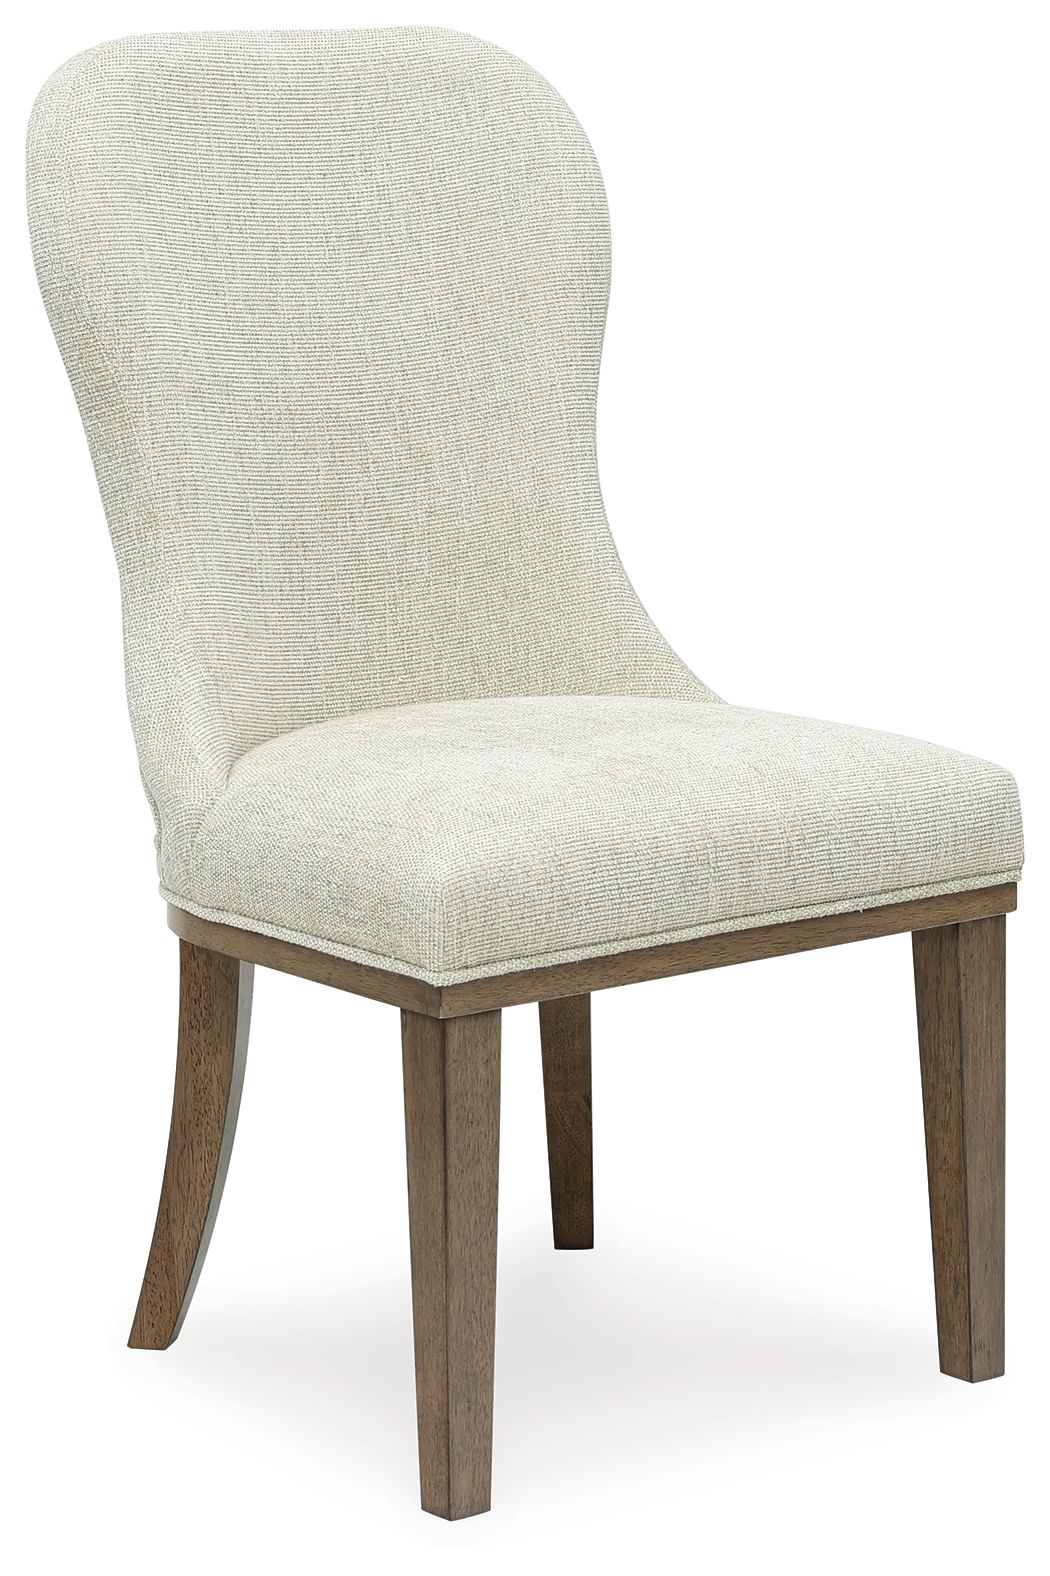 Sturlayne - Brown - Dining Upholstered Side Chair (Set of 2) - Tony's Home Furnishings